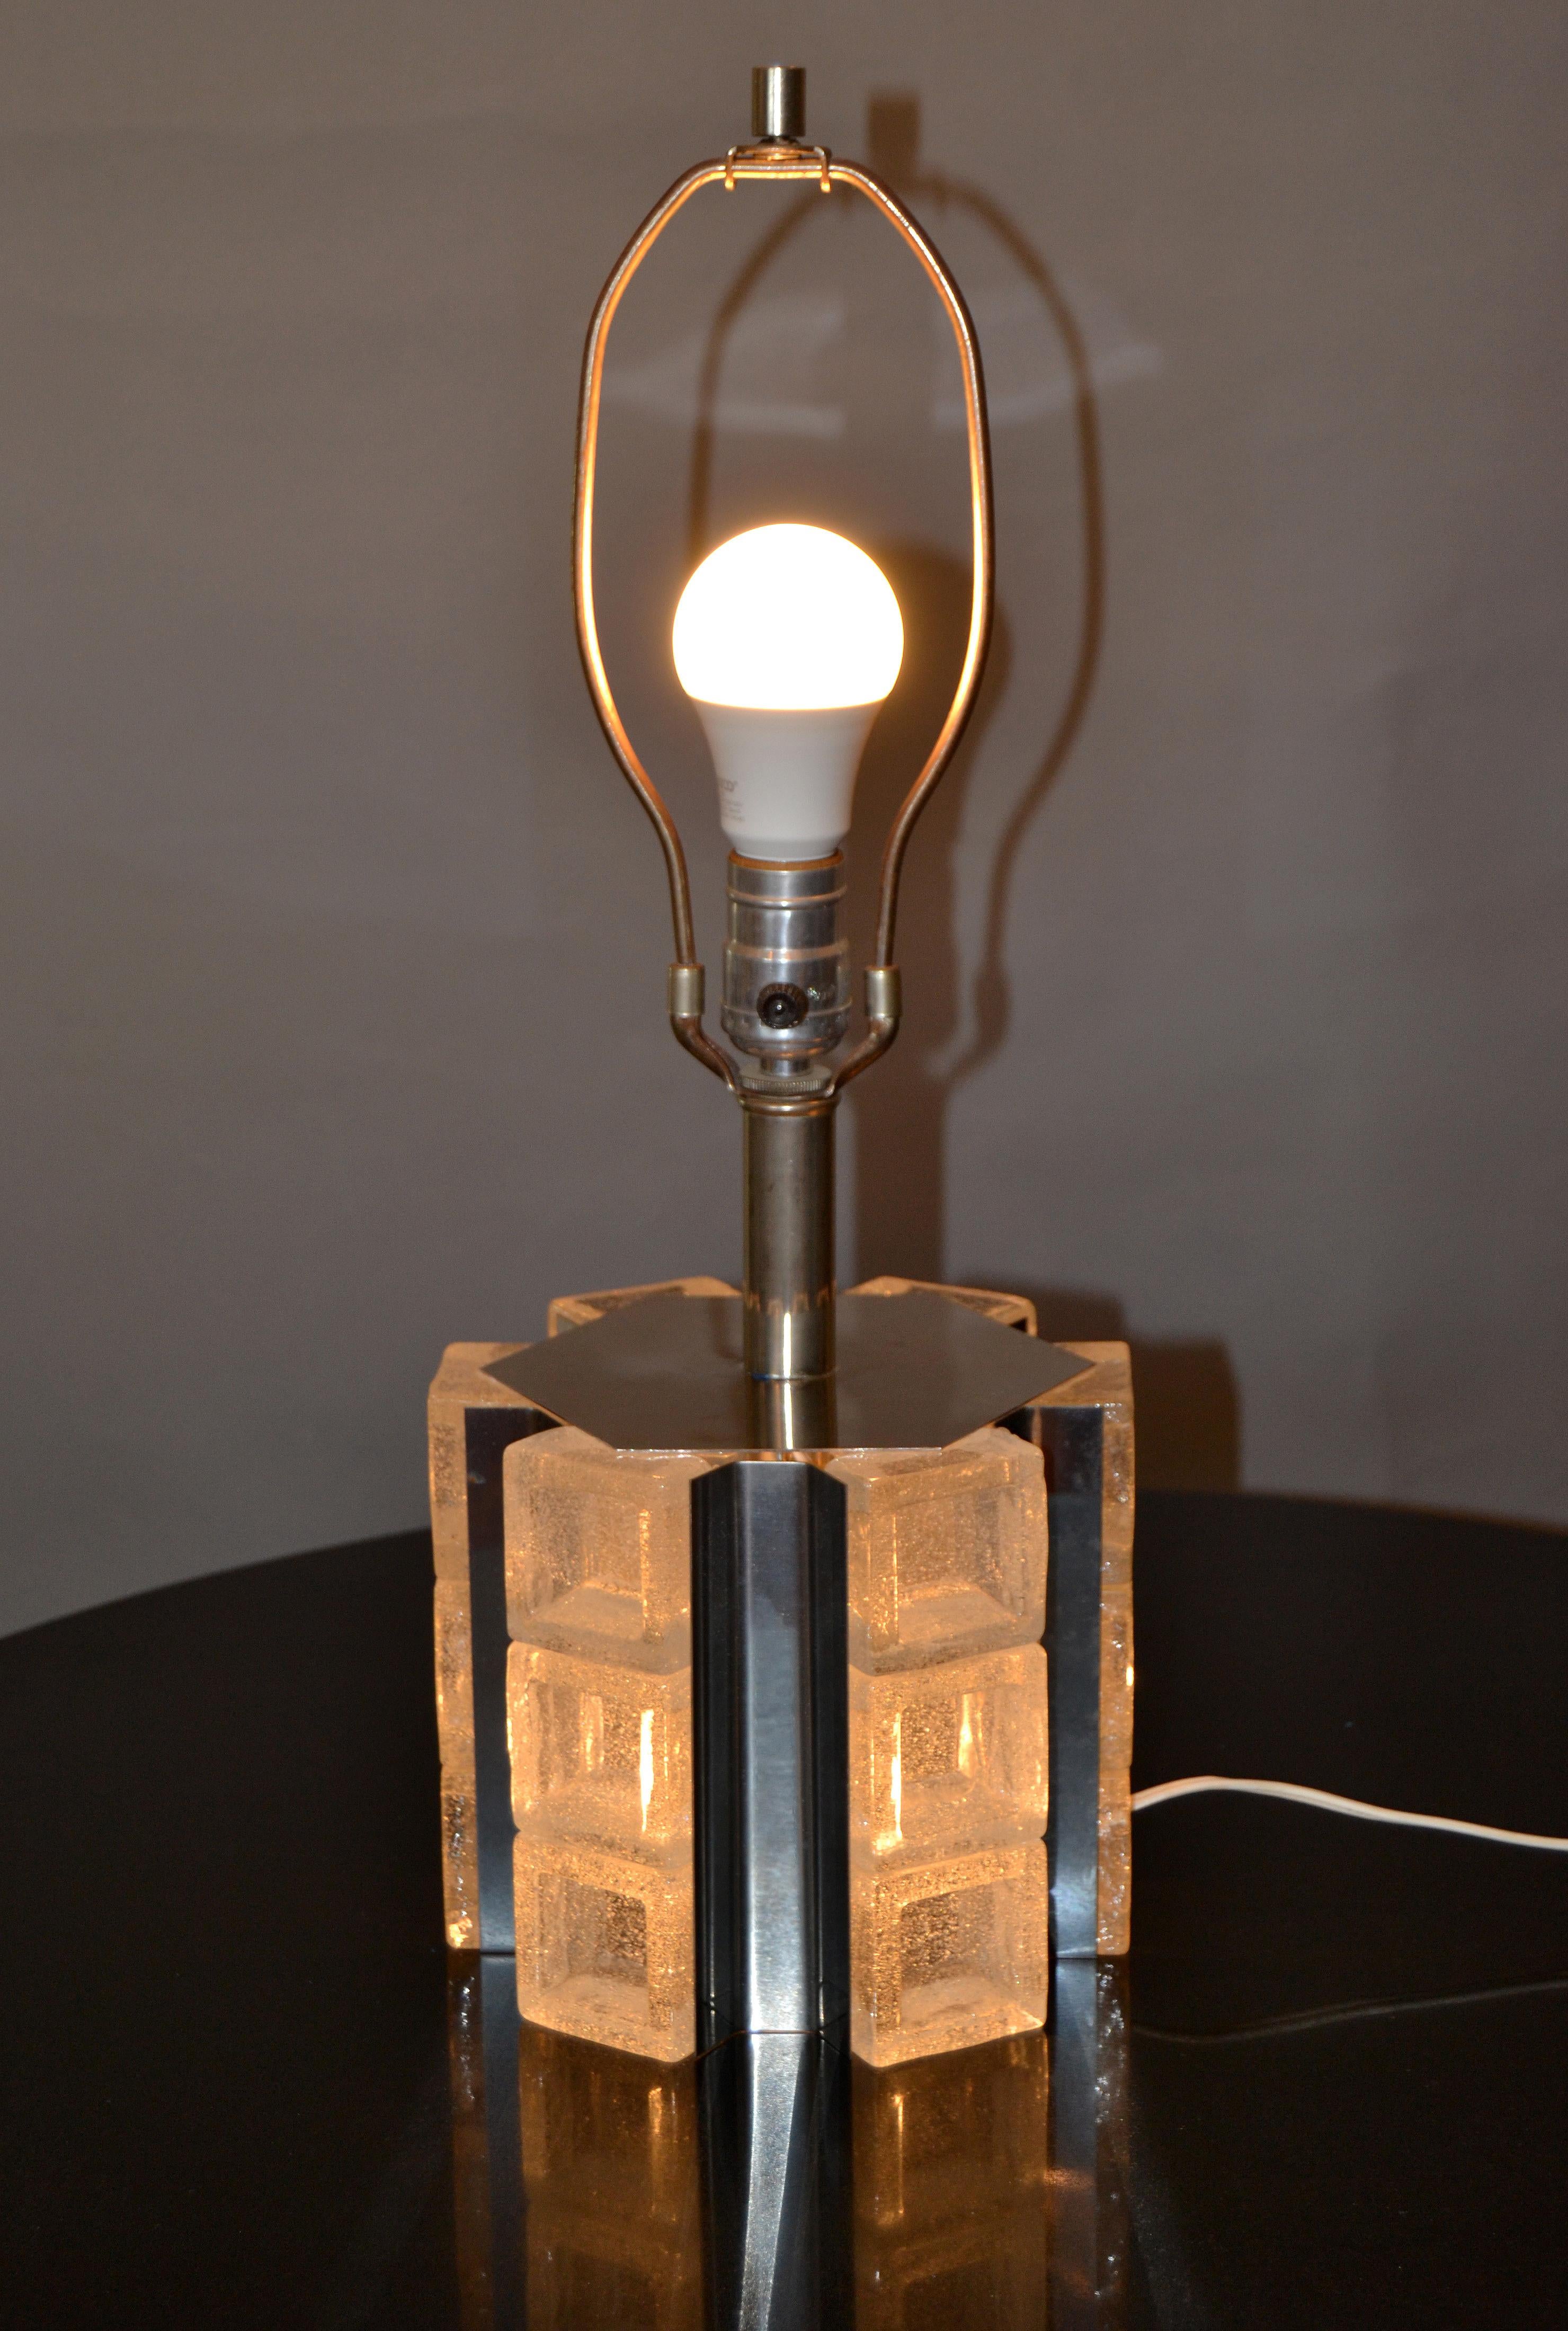 Mid-Century Modern octagonal Murano ice glass and chrome table lamp by Mazzega.
It is wired for the U.S. and takes 2 light bulbs, one regular 60 watts and a 25 watts inside the core.
No shade included.